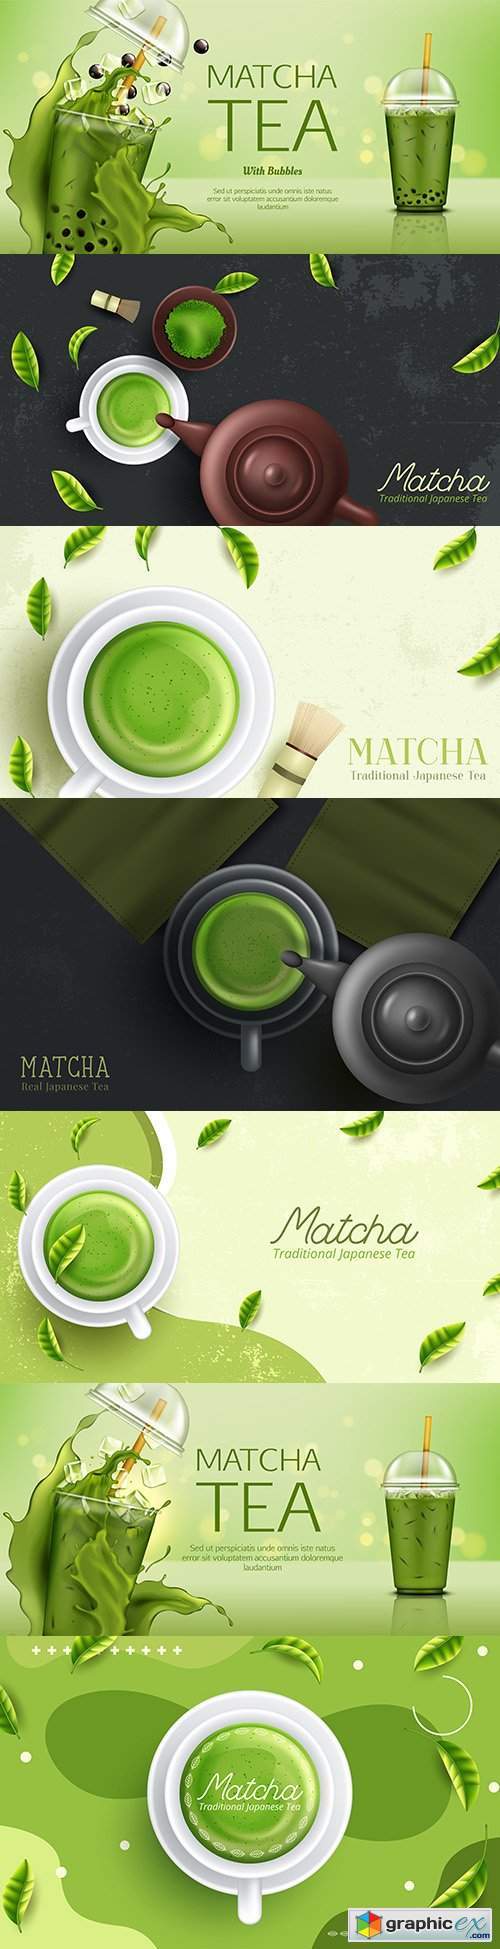 Green matte drink and tea accessories Japanese ceremony